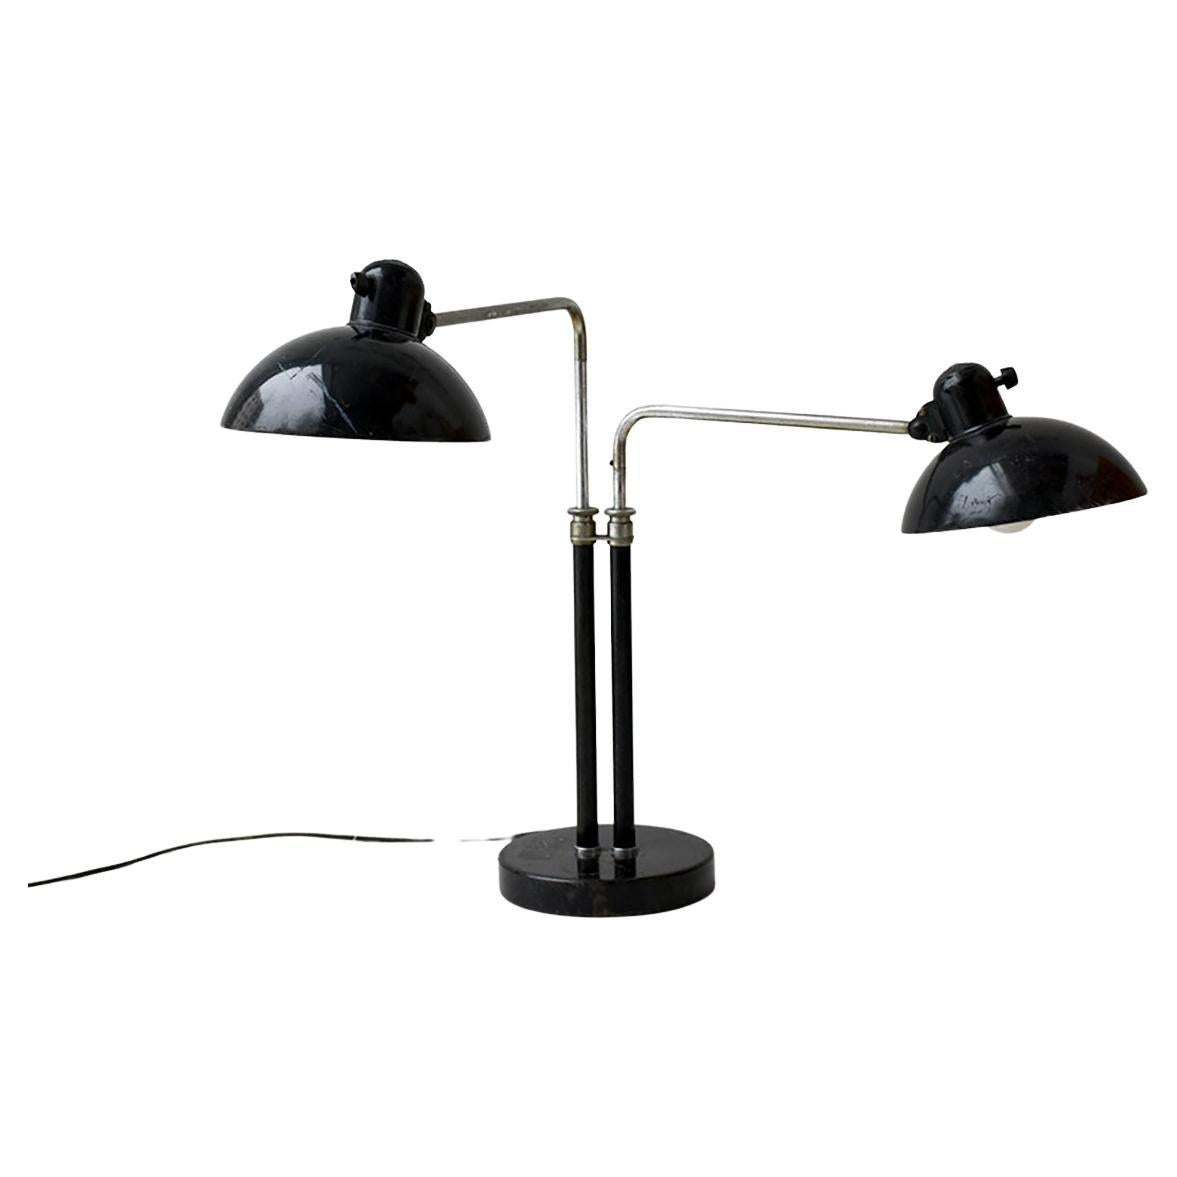 Bauhaus Double Arms Table Lamp 6580 by Christian Dell for Kaiser Idell, 1930s 